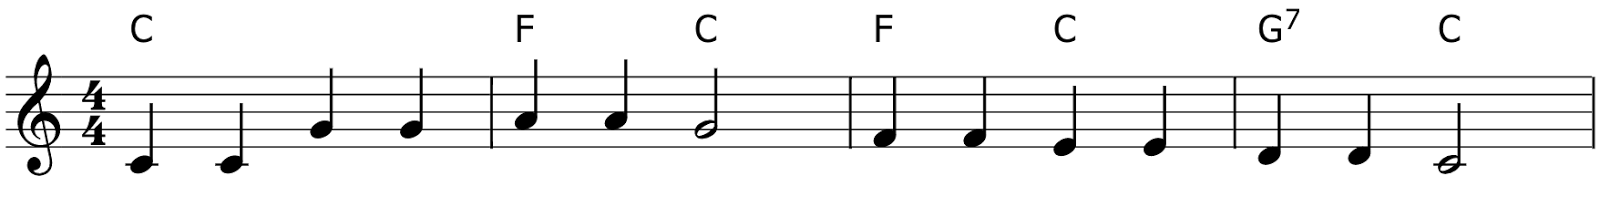 Twinkle, twinkle little star in C major, with chords